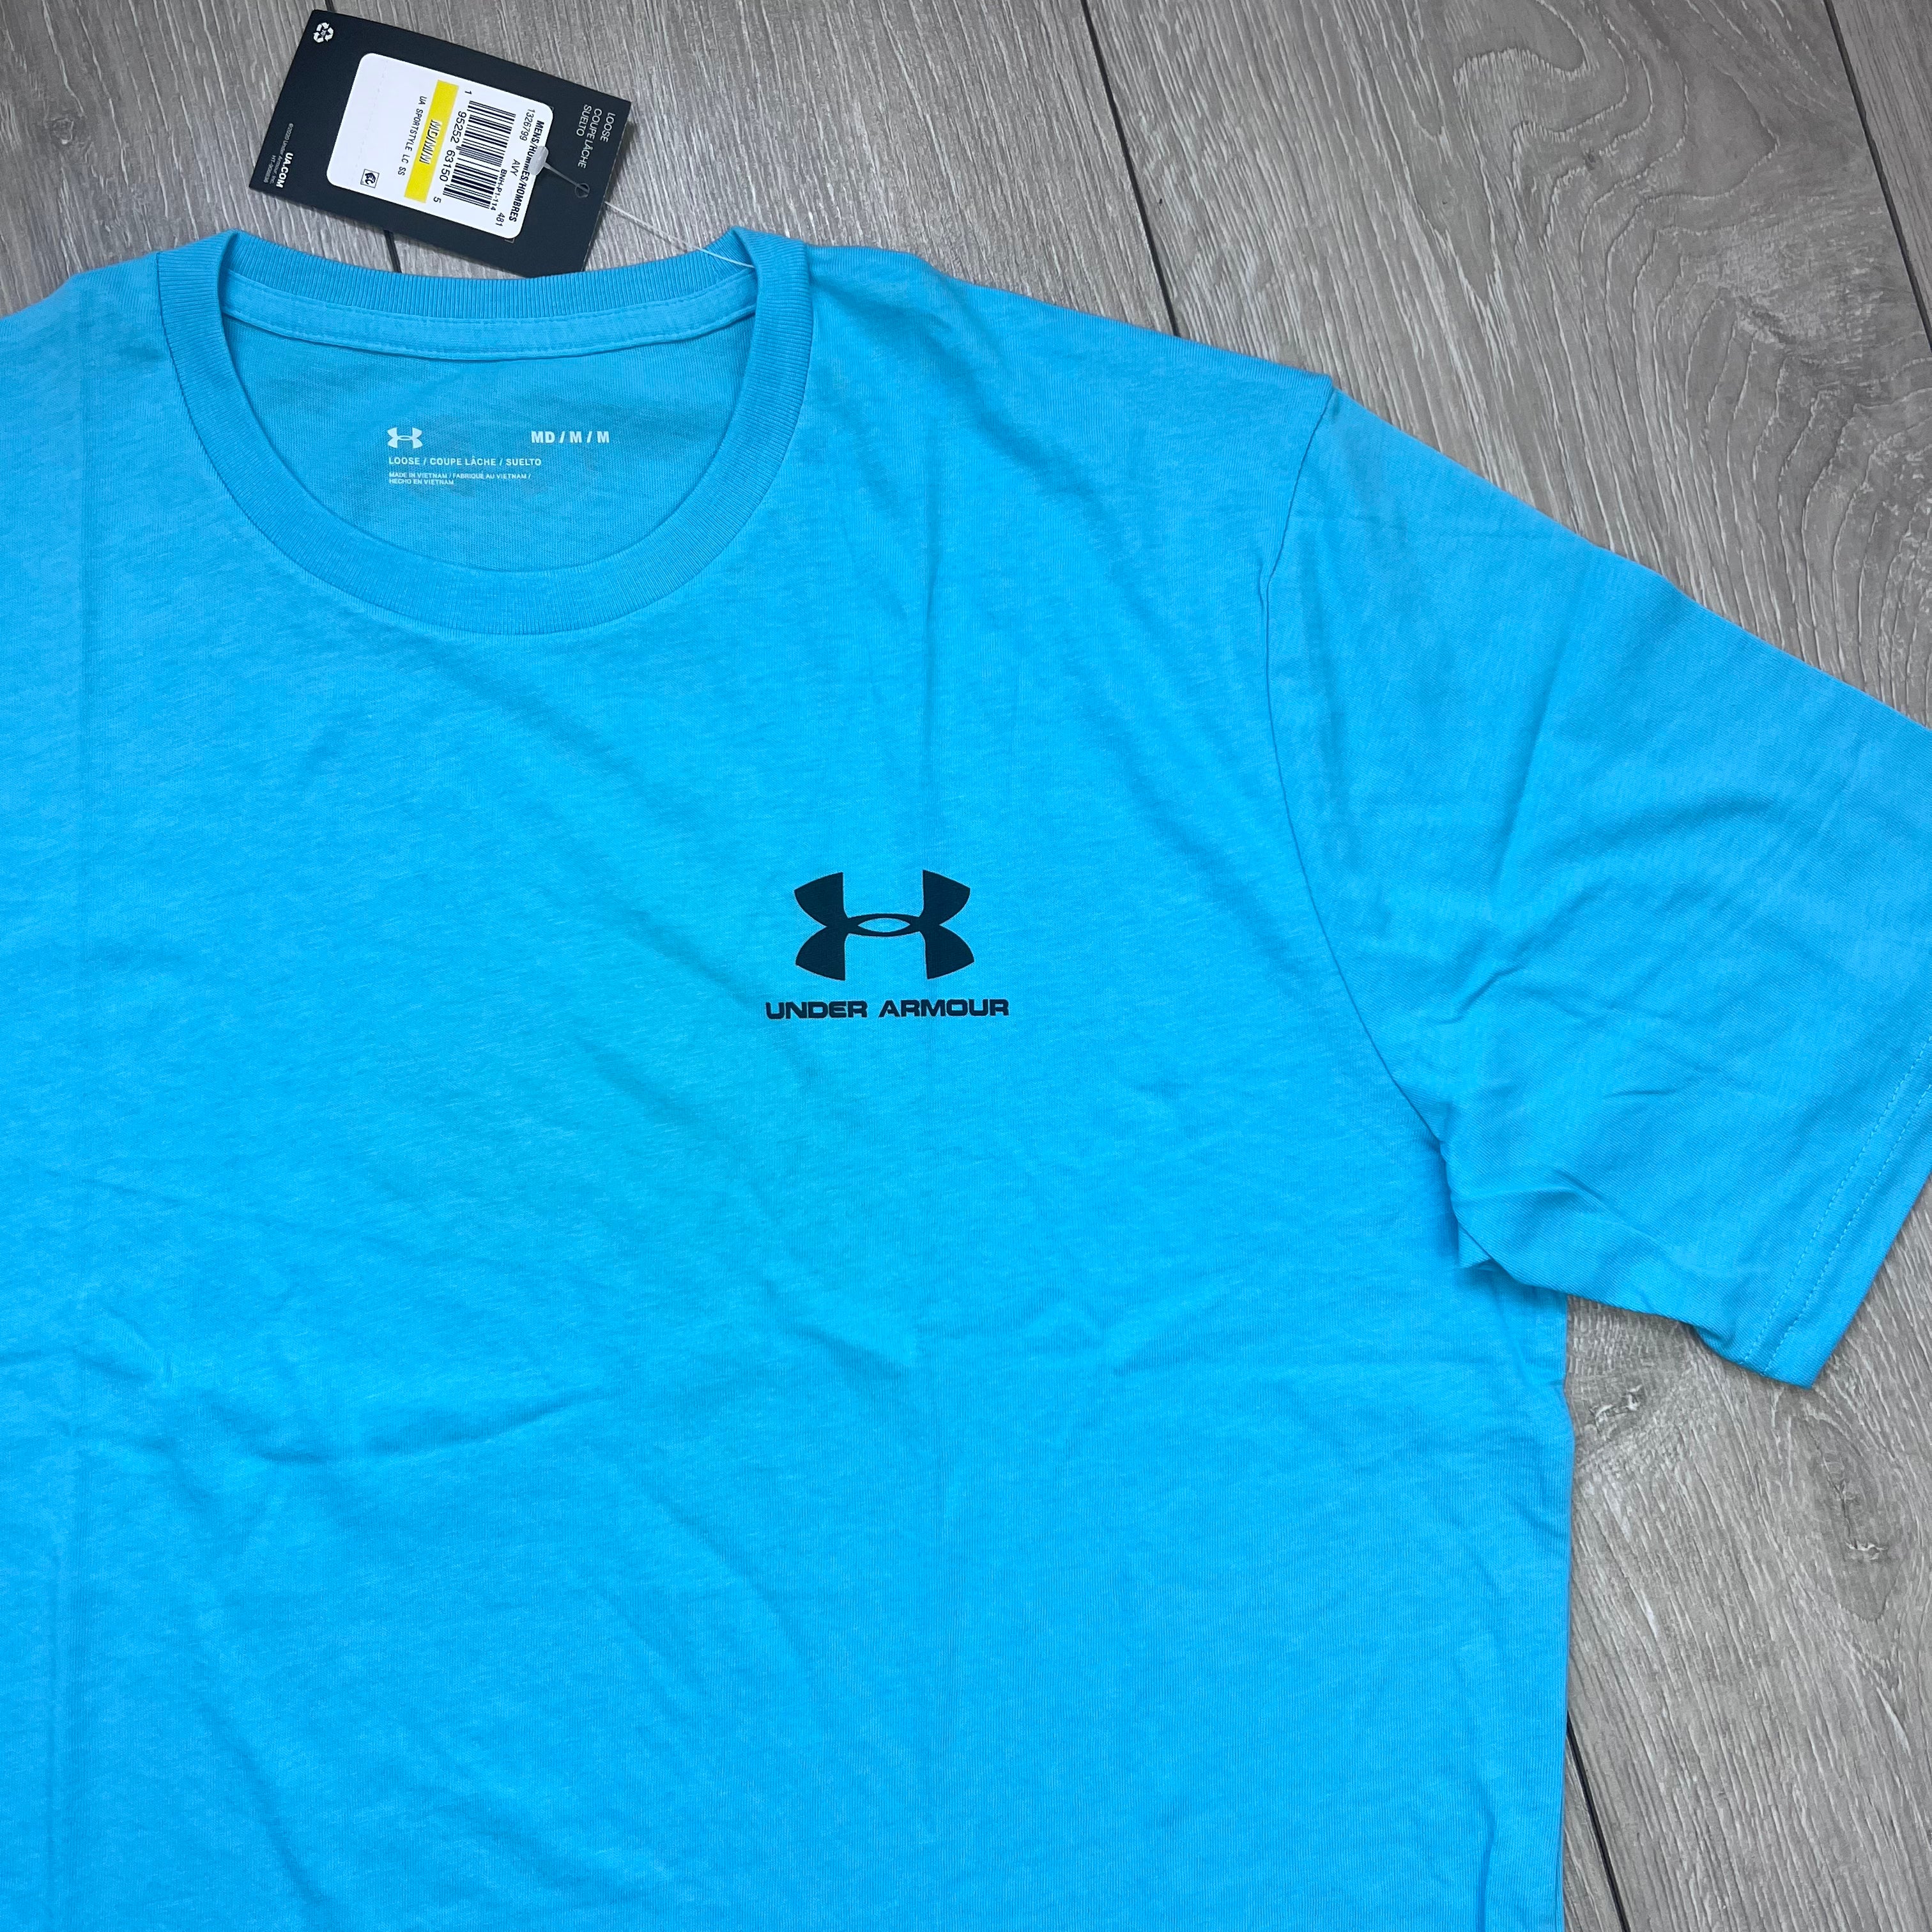 Under Armour T-Shirt - Turquoise